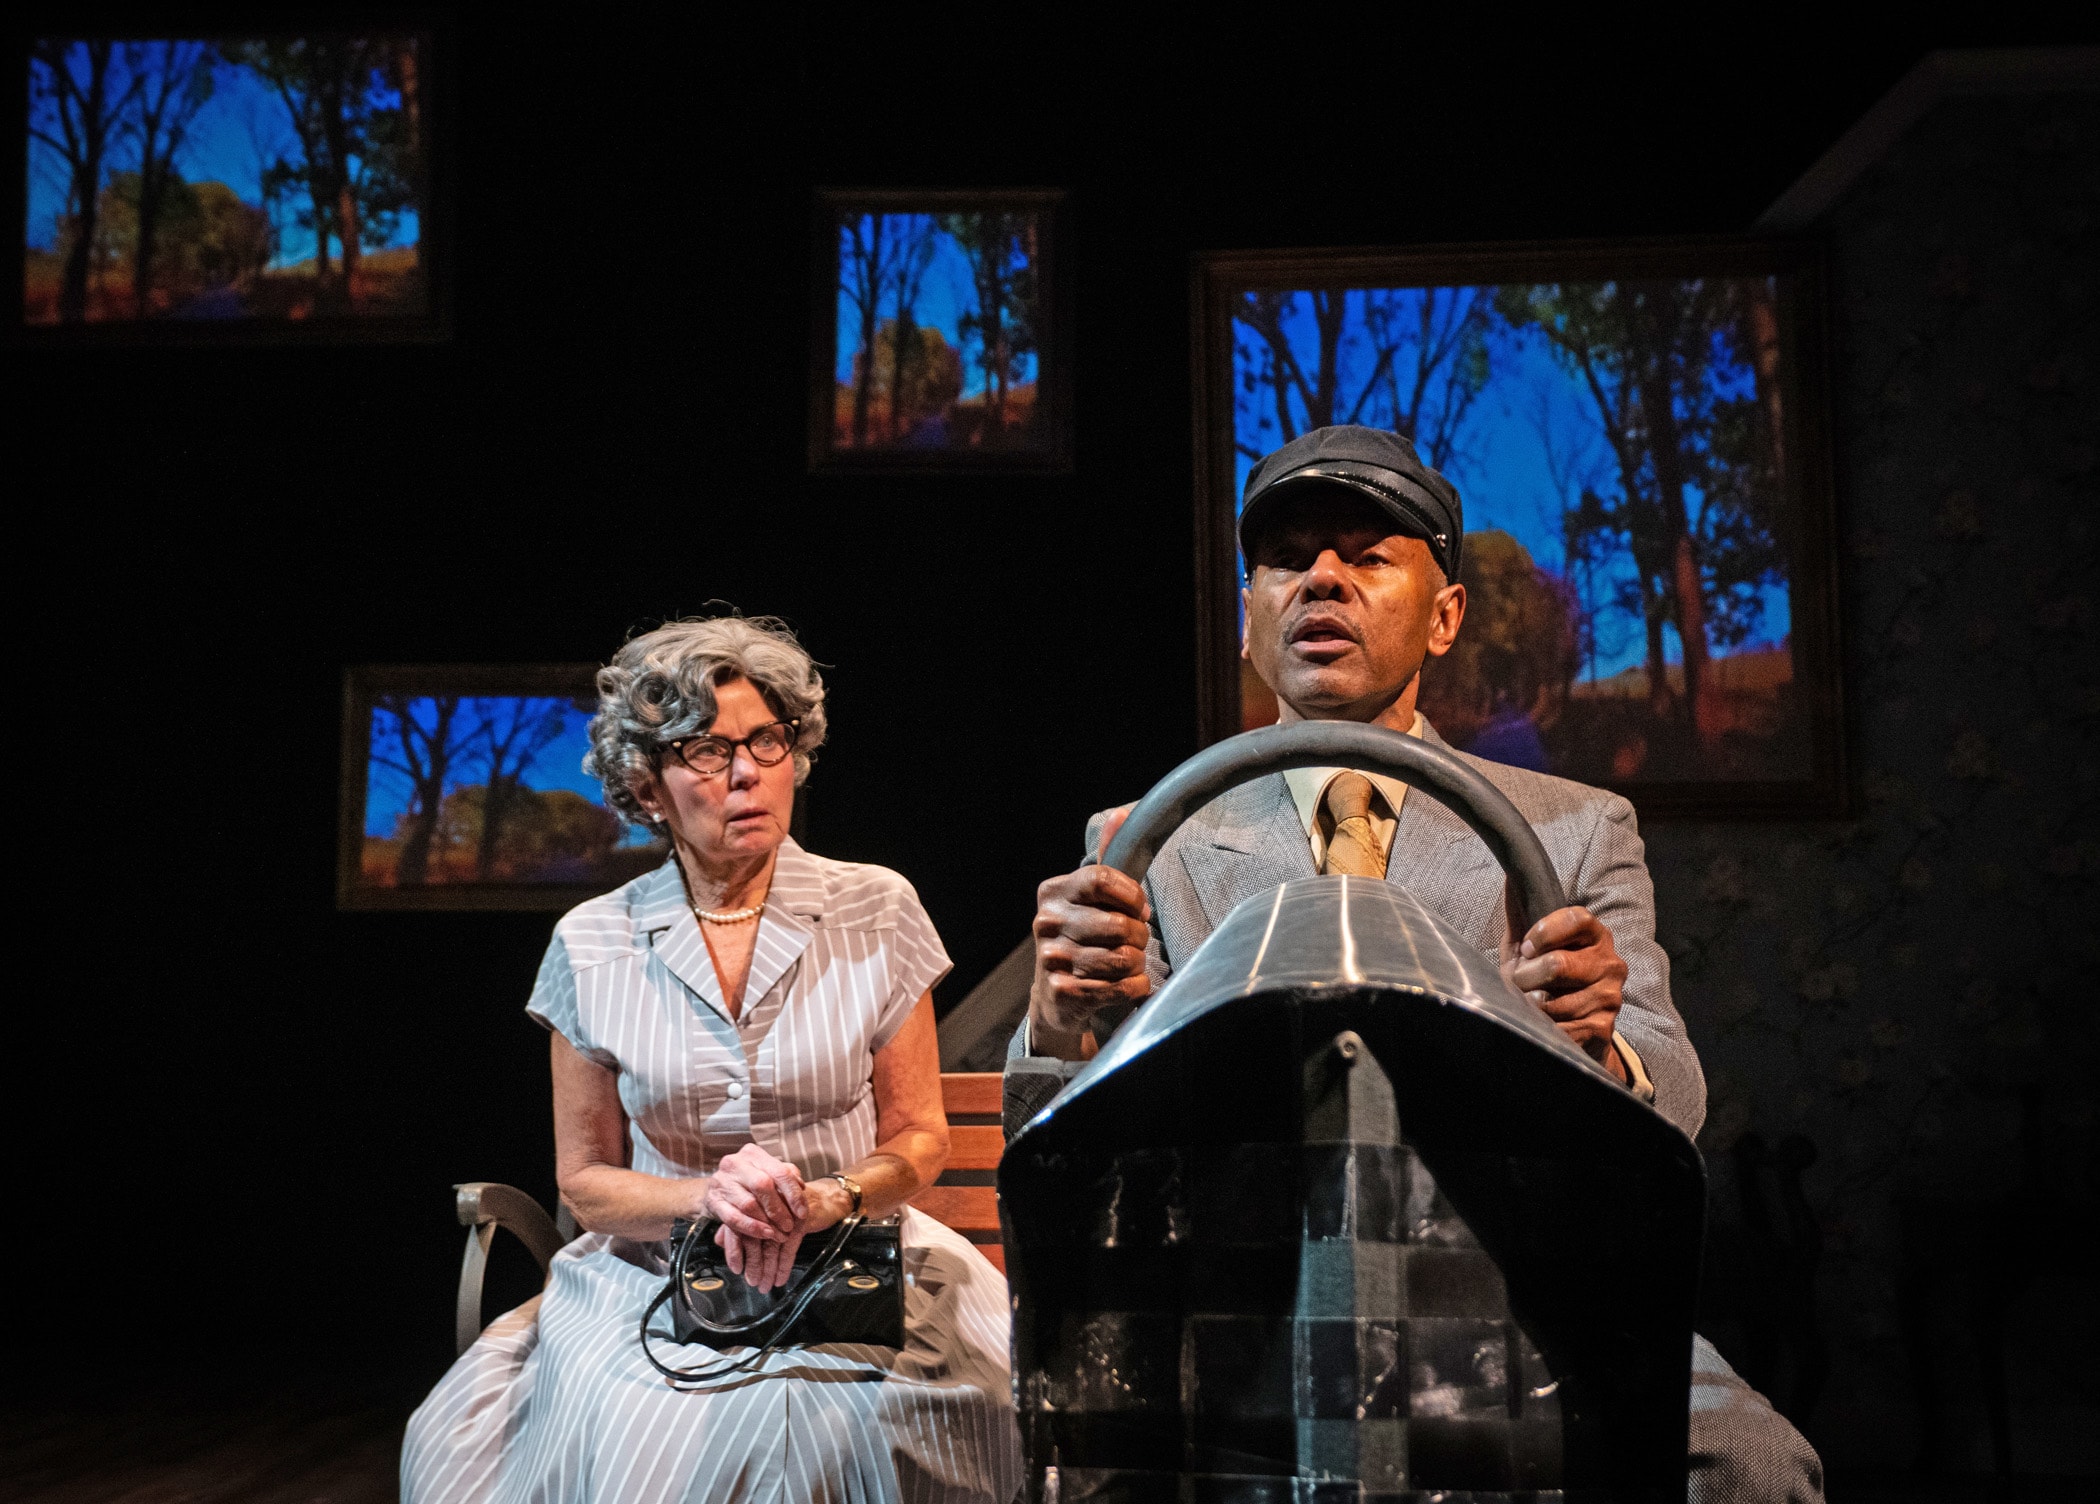 Adele Robey (Daisy Werthan) and James Foster Jr. (Hoke Colburn) in Driving Miss Daisy, now playing at Anacostia Playhouse. Photo by Jabari Jefferson.